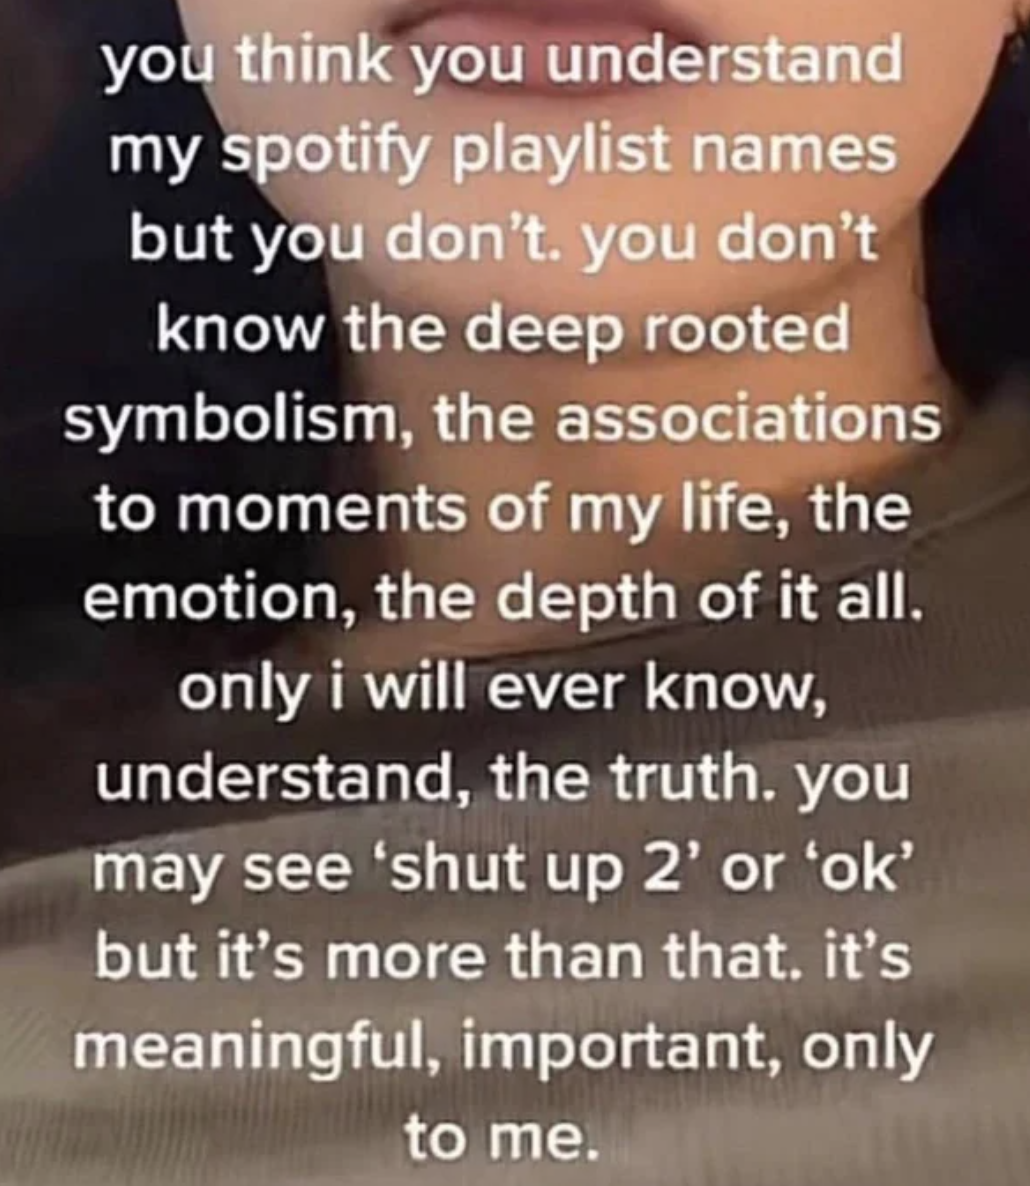 Post about people who think they understand their Spotify playlist names but they don&#x27;t know the deep-rooted symbolism, the emotions, the associations to moment of their life, the depth of it all,